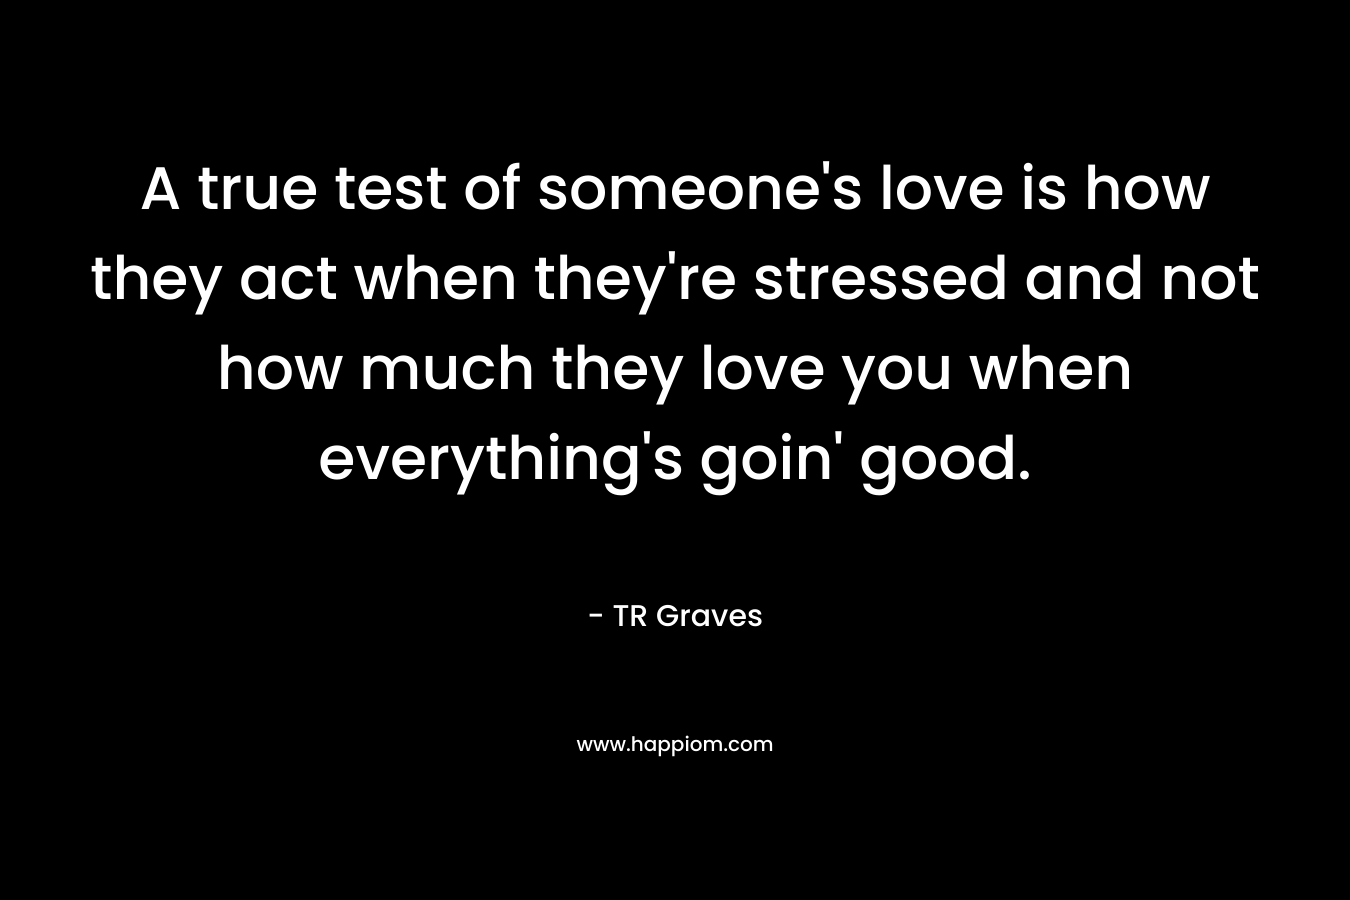 A true test of someone's love is how they act when they're stressed and not how much they love you when everything's goin' good.